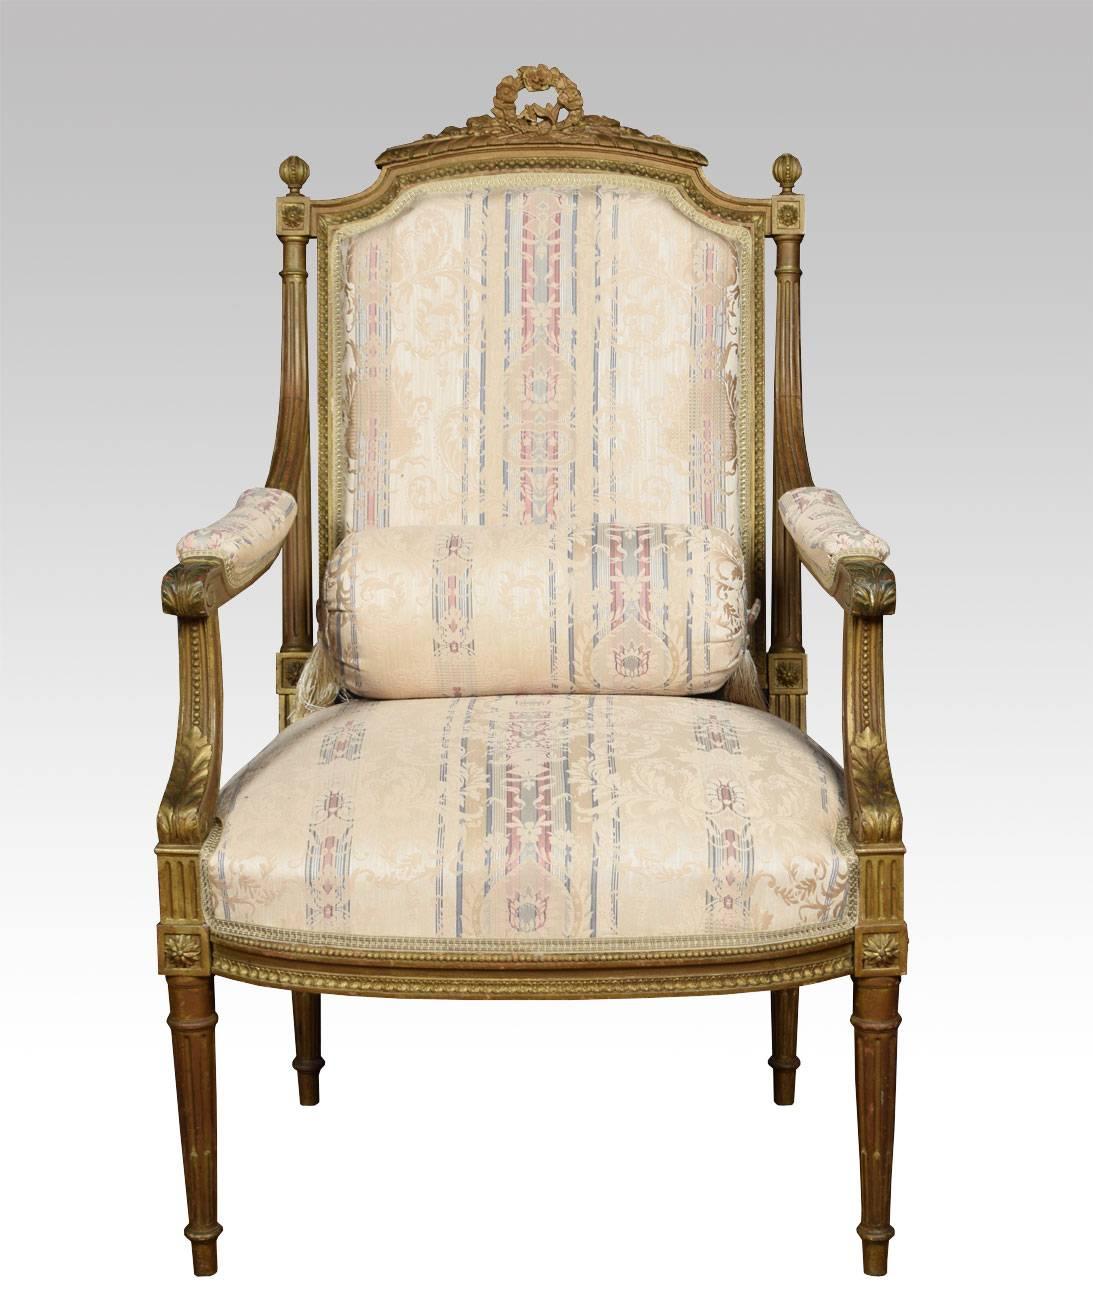 Pair of French Louis XVI style giltwood armchairs the carved cresting top rail above upholstered padded backs, seats and arms raised up on turned fluted legs

Dimensions:

Height 42.5 inches, height to seat 16 inches

Width 25 inches

Depth